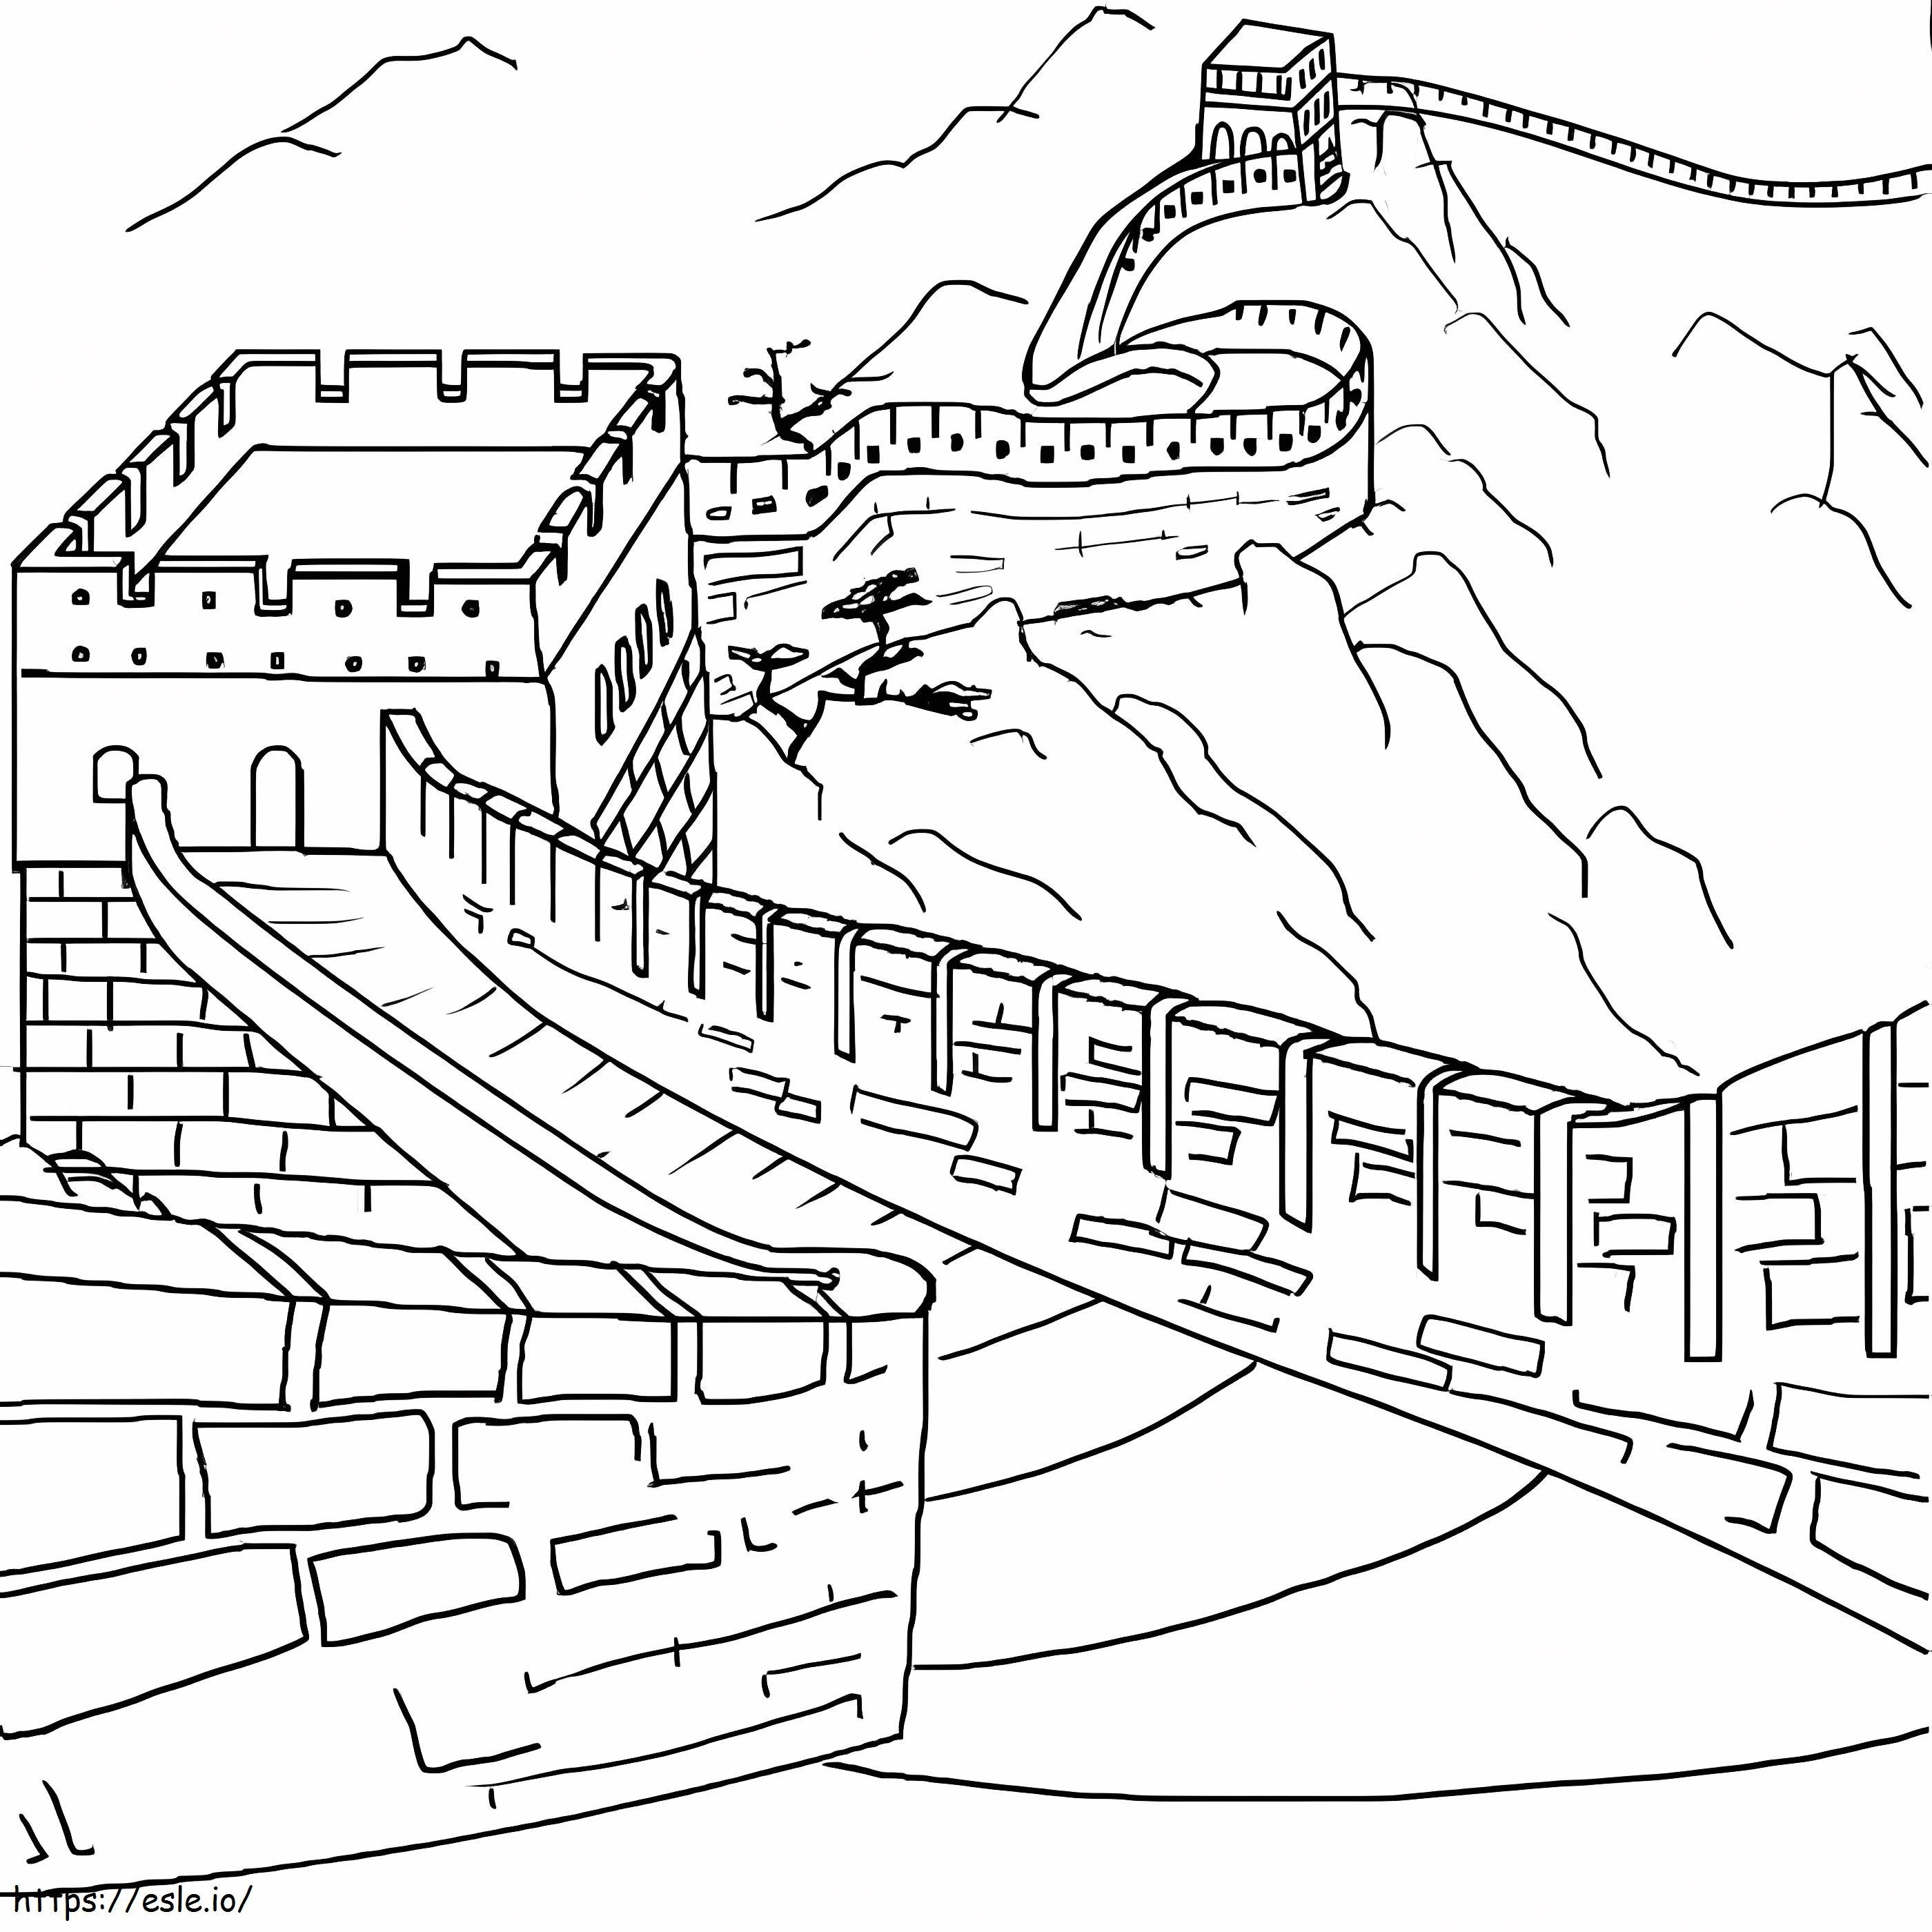 Nice Great Wall coloring page